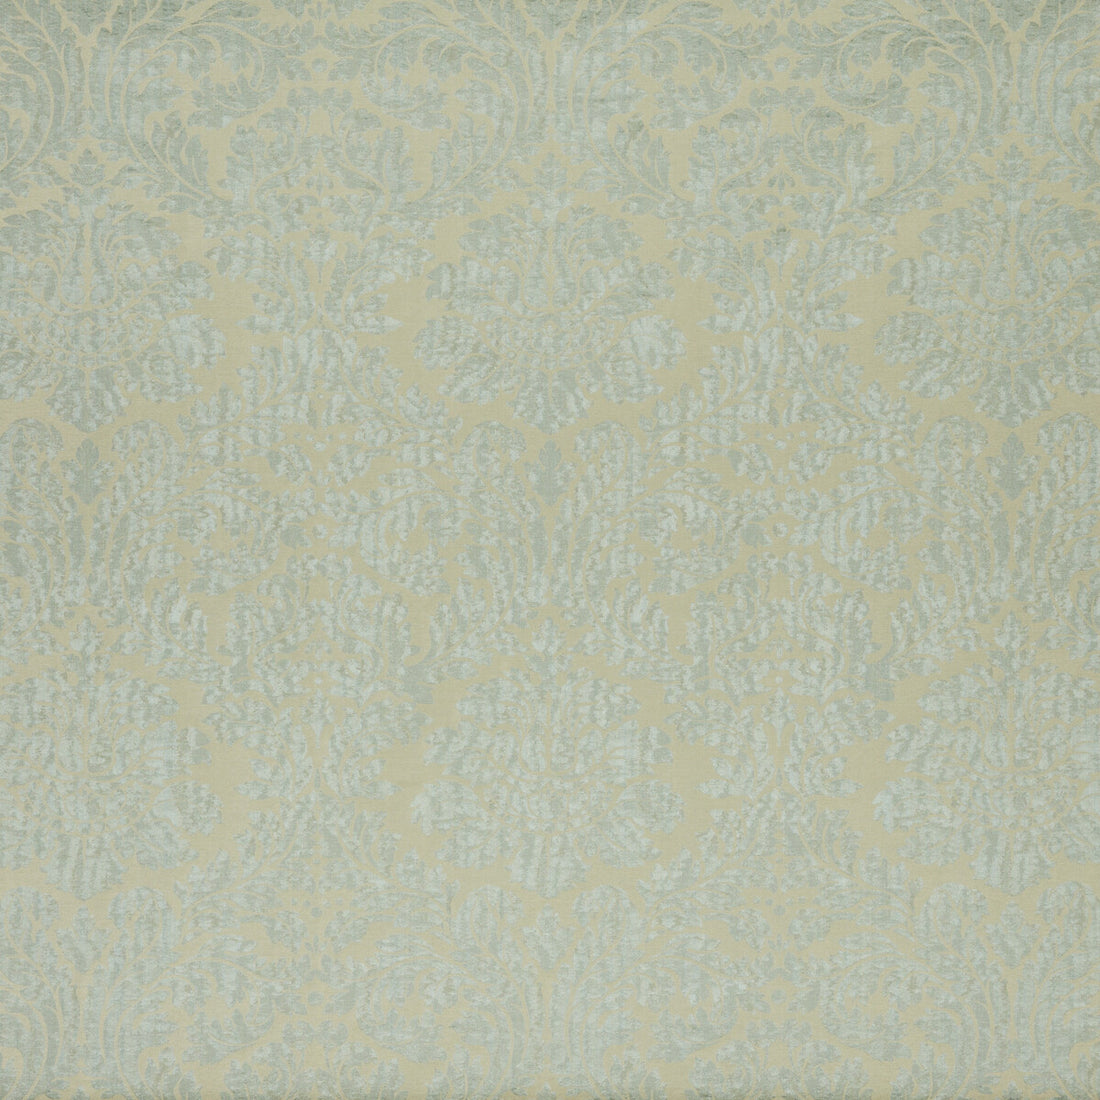 Sibley fabric in aqua/bronze color - pattern BF10615.725.0 - by G P &amp; J Baker in the Cosmopolitan collection